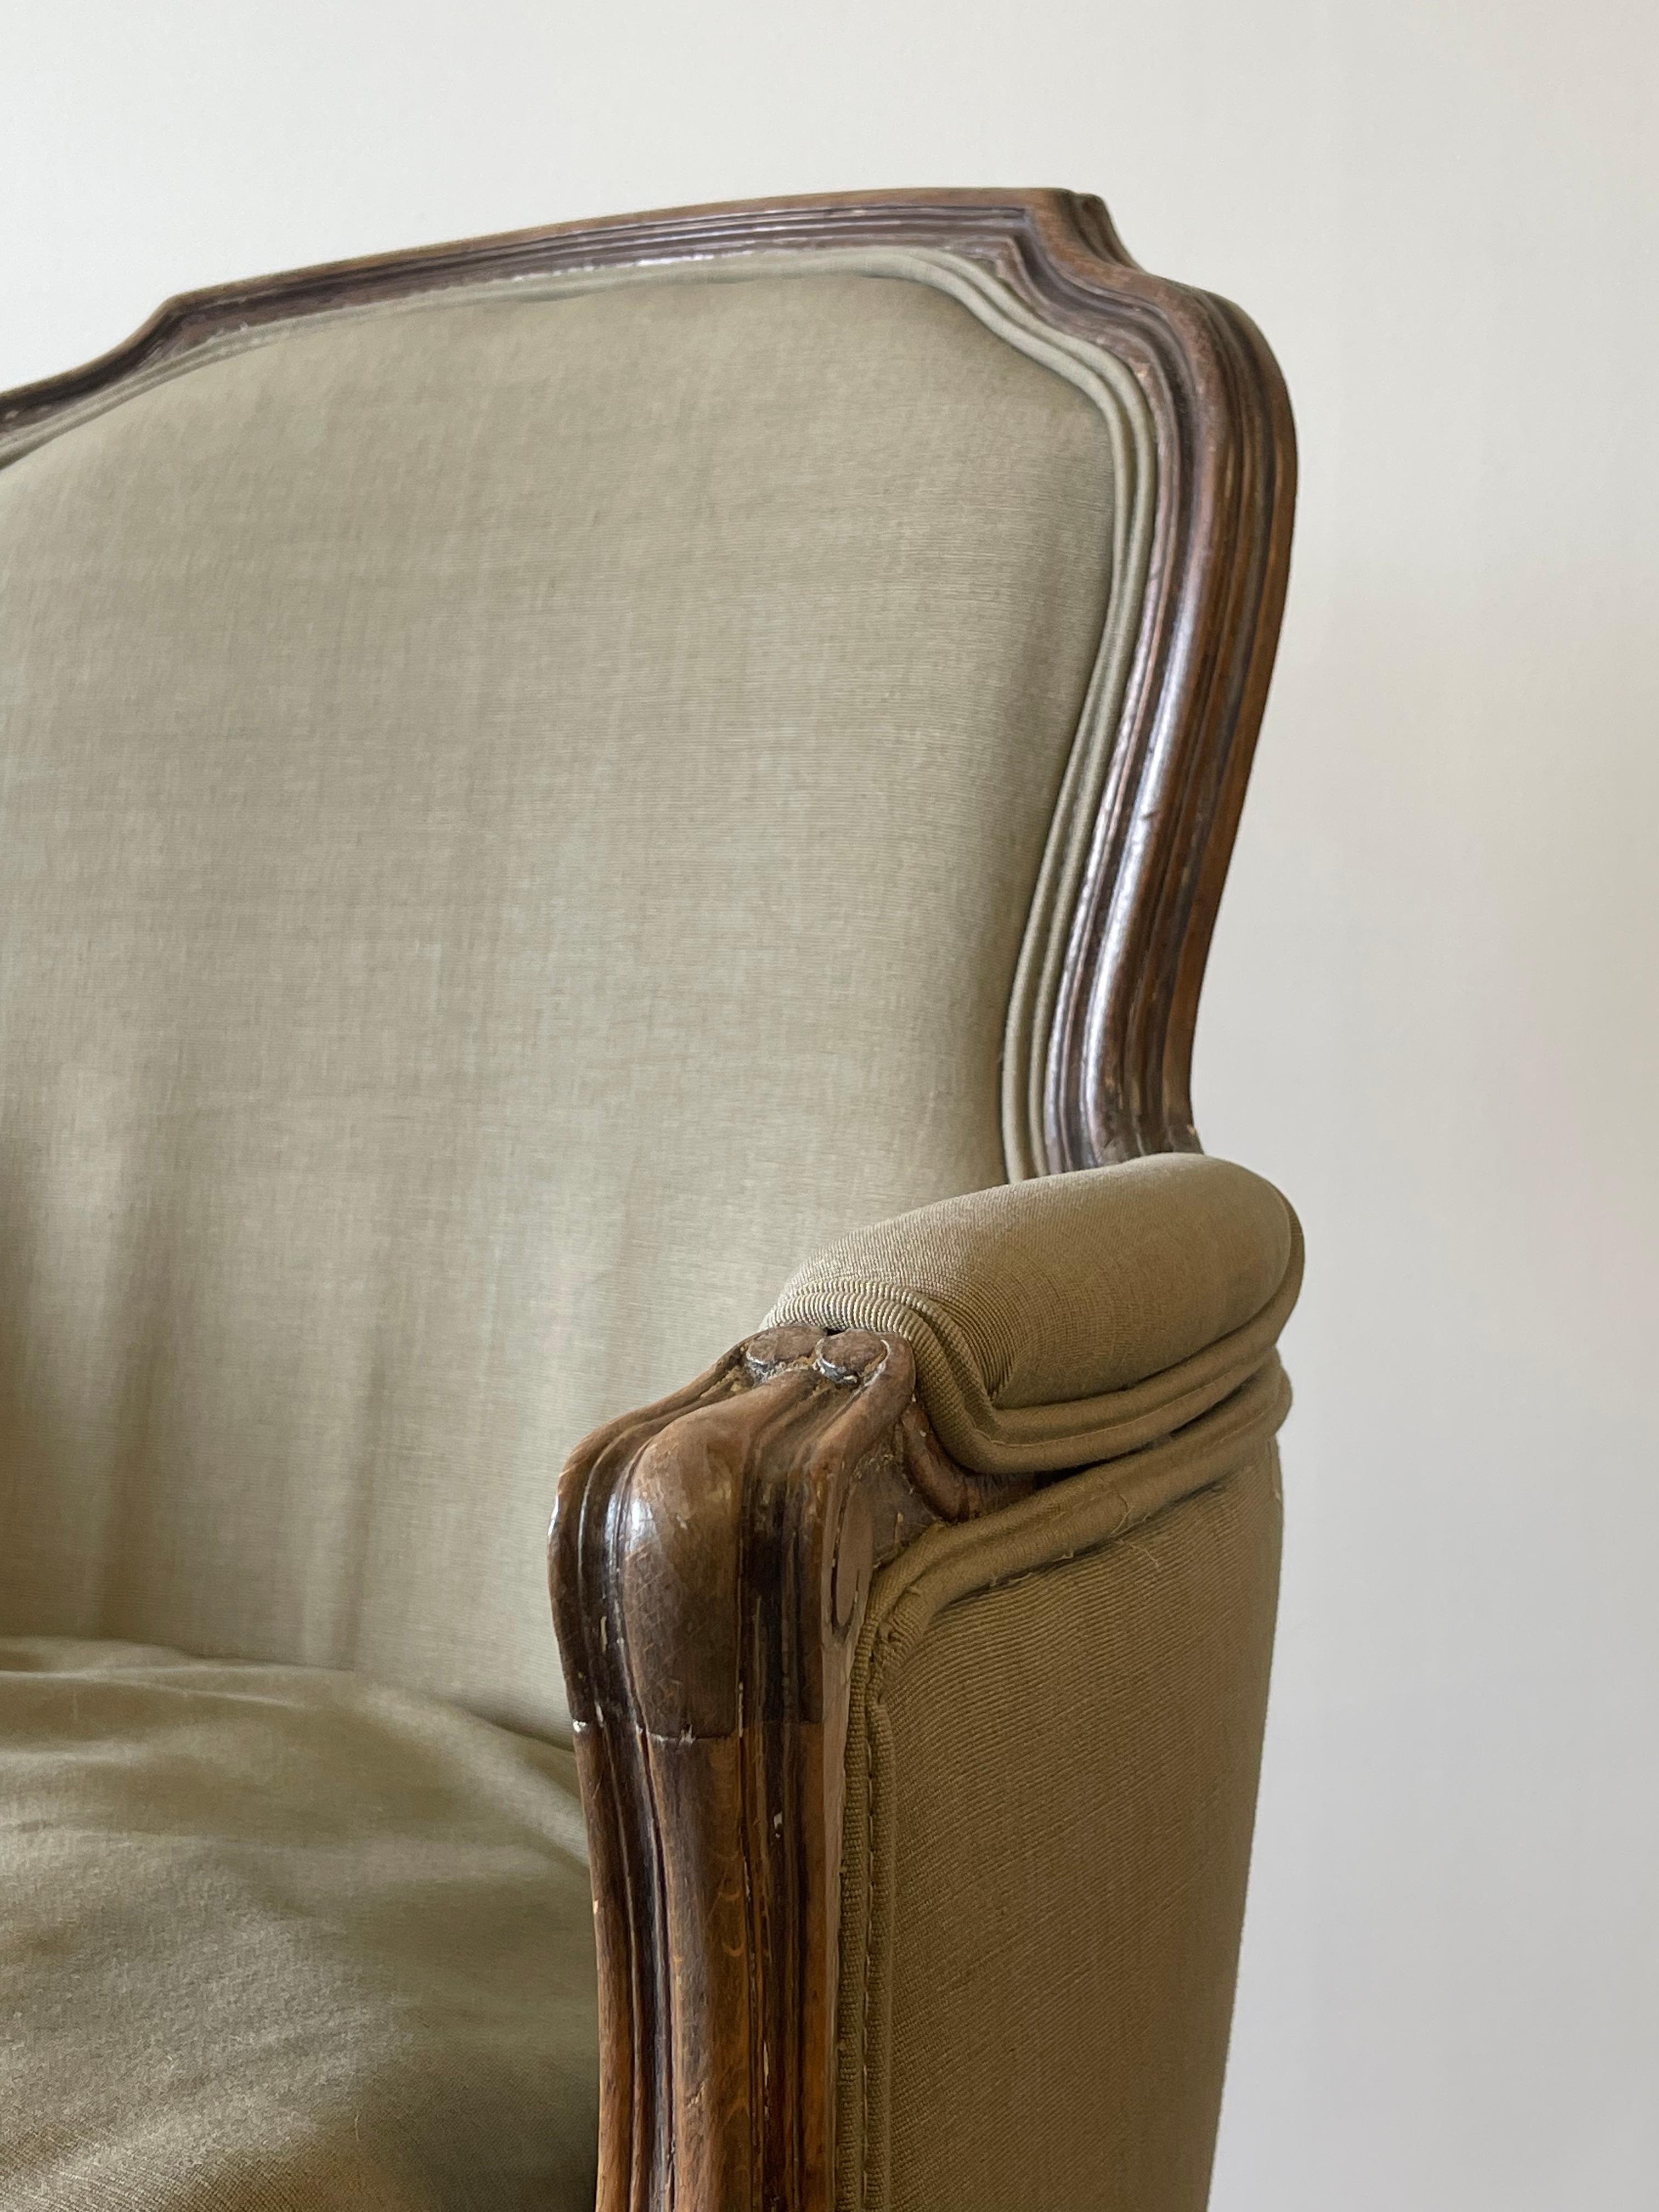 French provincial style upholstered arm chairs or bergeres, with a shaped molded crestrail above an upholstered back en cabriolet, the back, sides, and seat now upholstered in an olive green linnen, on shaped seat above cabriole legs.